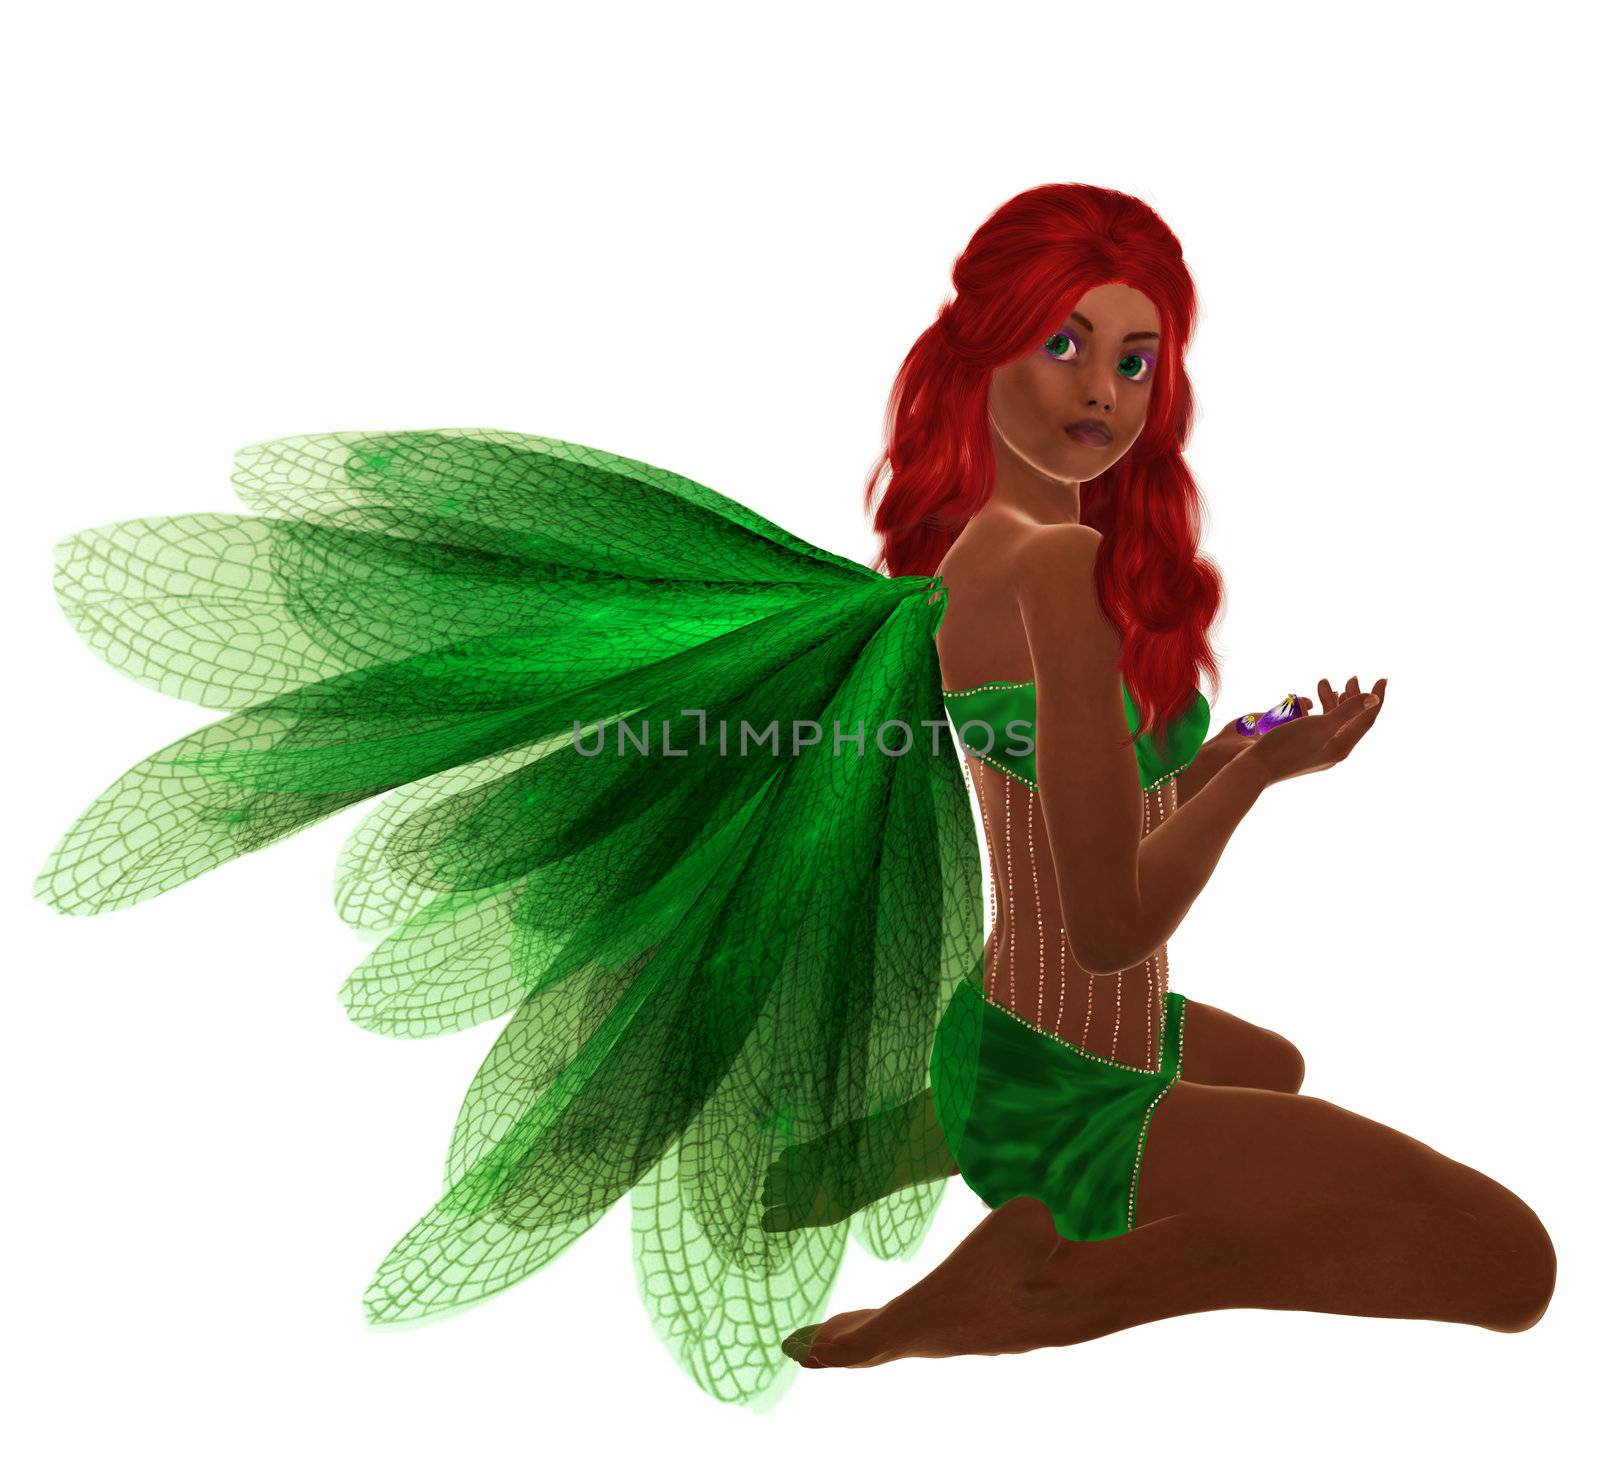 Green fairy with red hair, sitting holding flowers in her hand